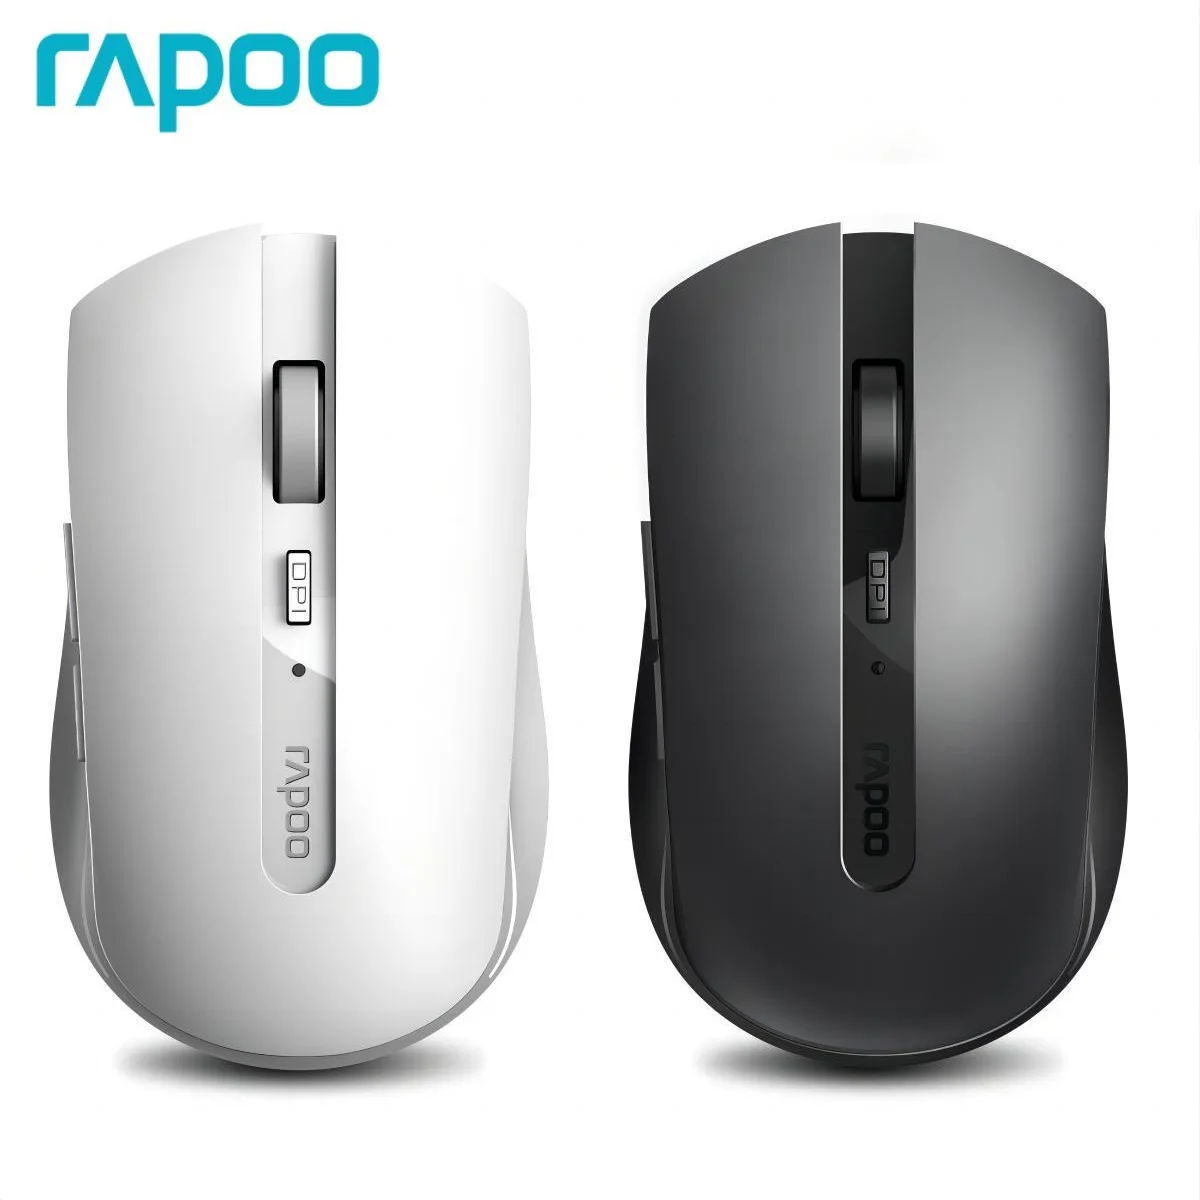 RAPOO 7200M Multi-Mode 2.4G Wireless and Bluetooth 3.0/4.0 Wireless Mouse 1600DPI Ergonomic Silent Mouse for Computer PC Laptop